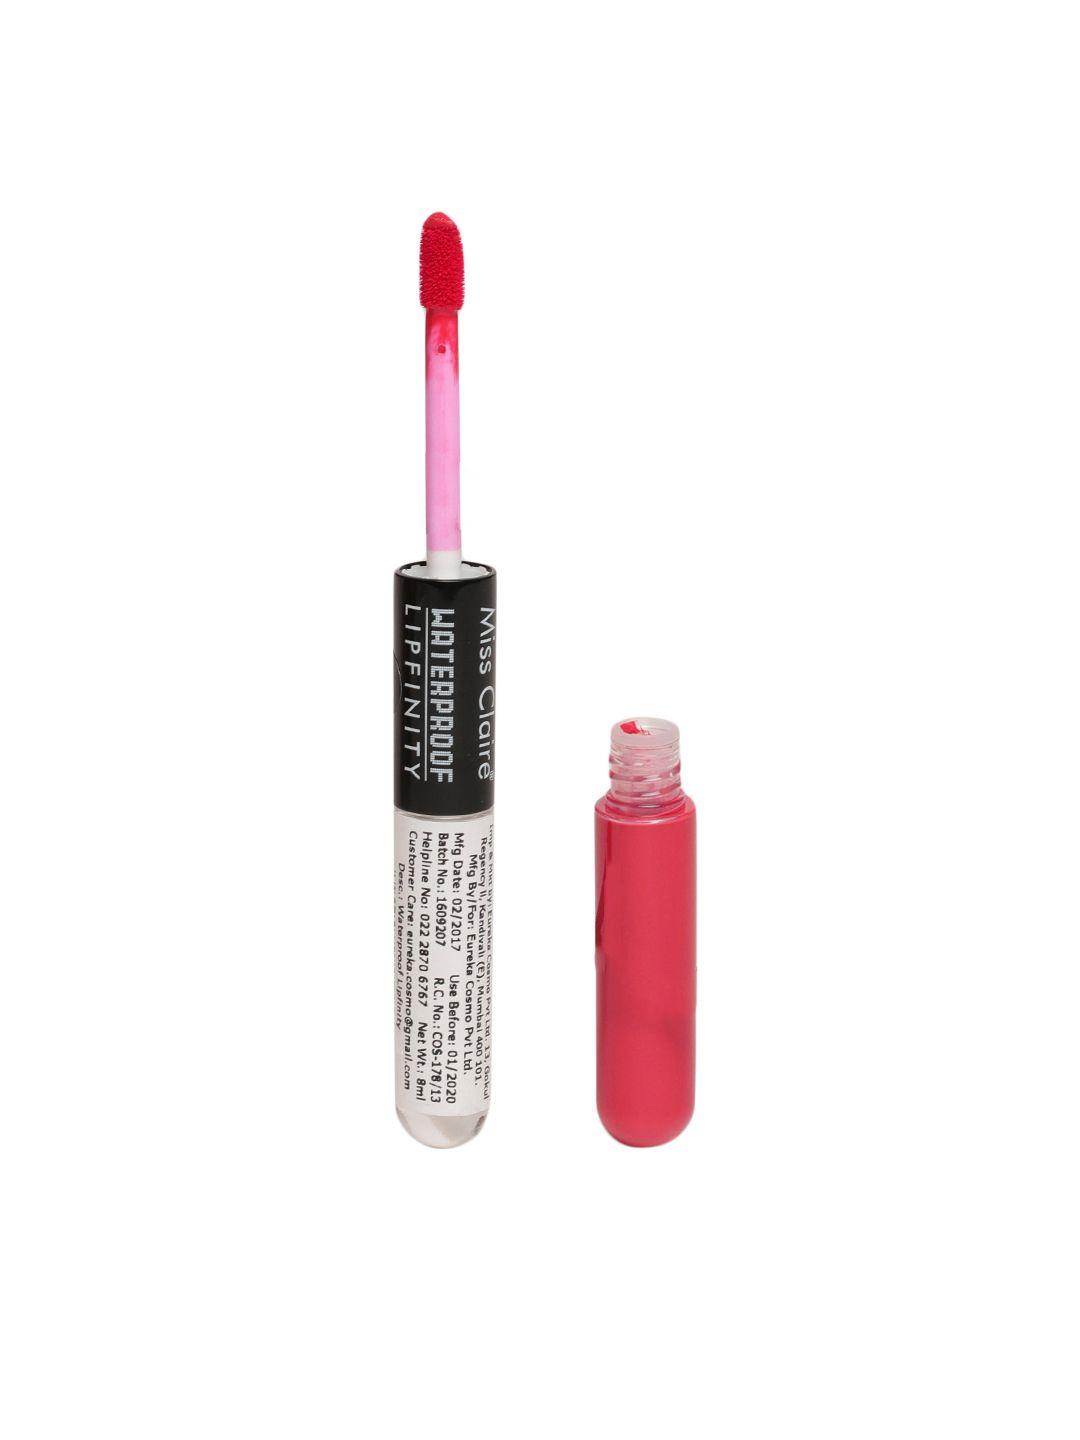 miss claire 5 colorstay full time lipcolor 10ml